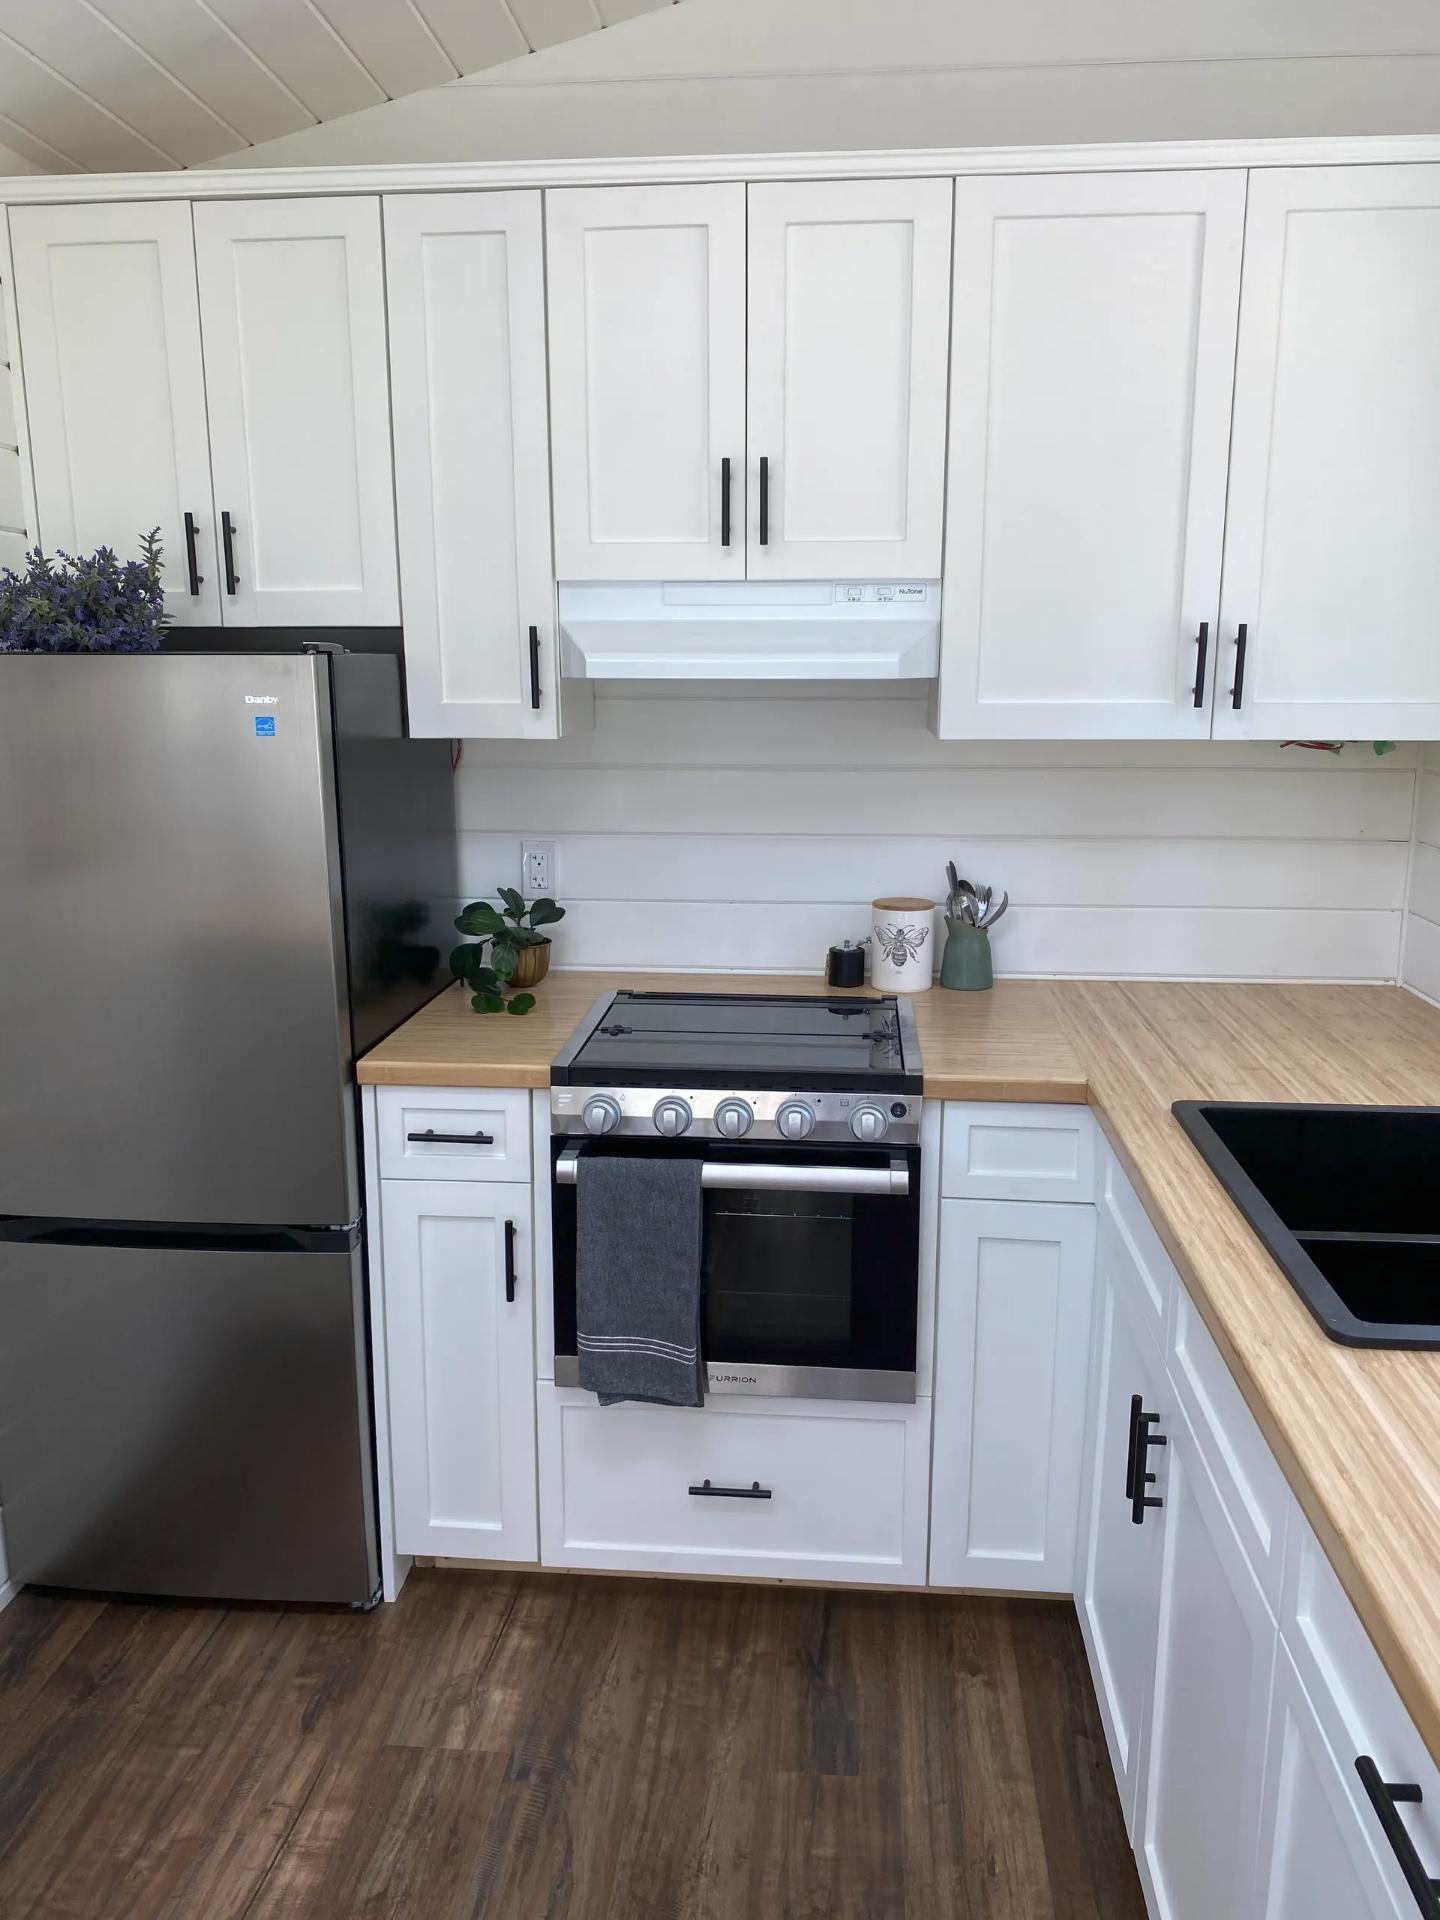 Stainless Steel Refrigerator and Range - Atlas by Canadian Tiny Homes